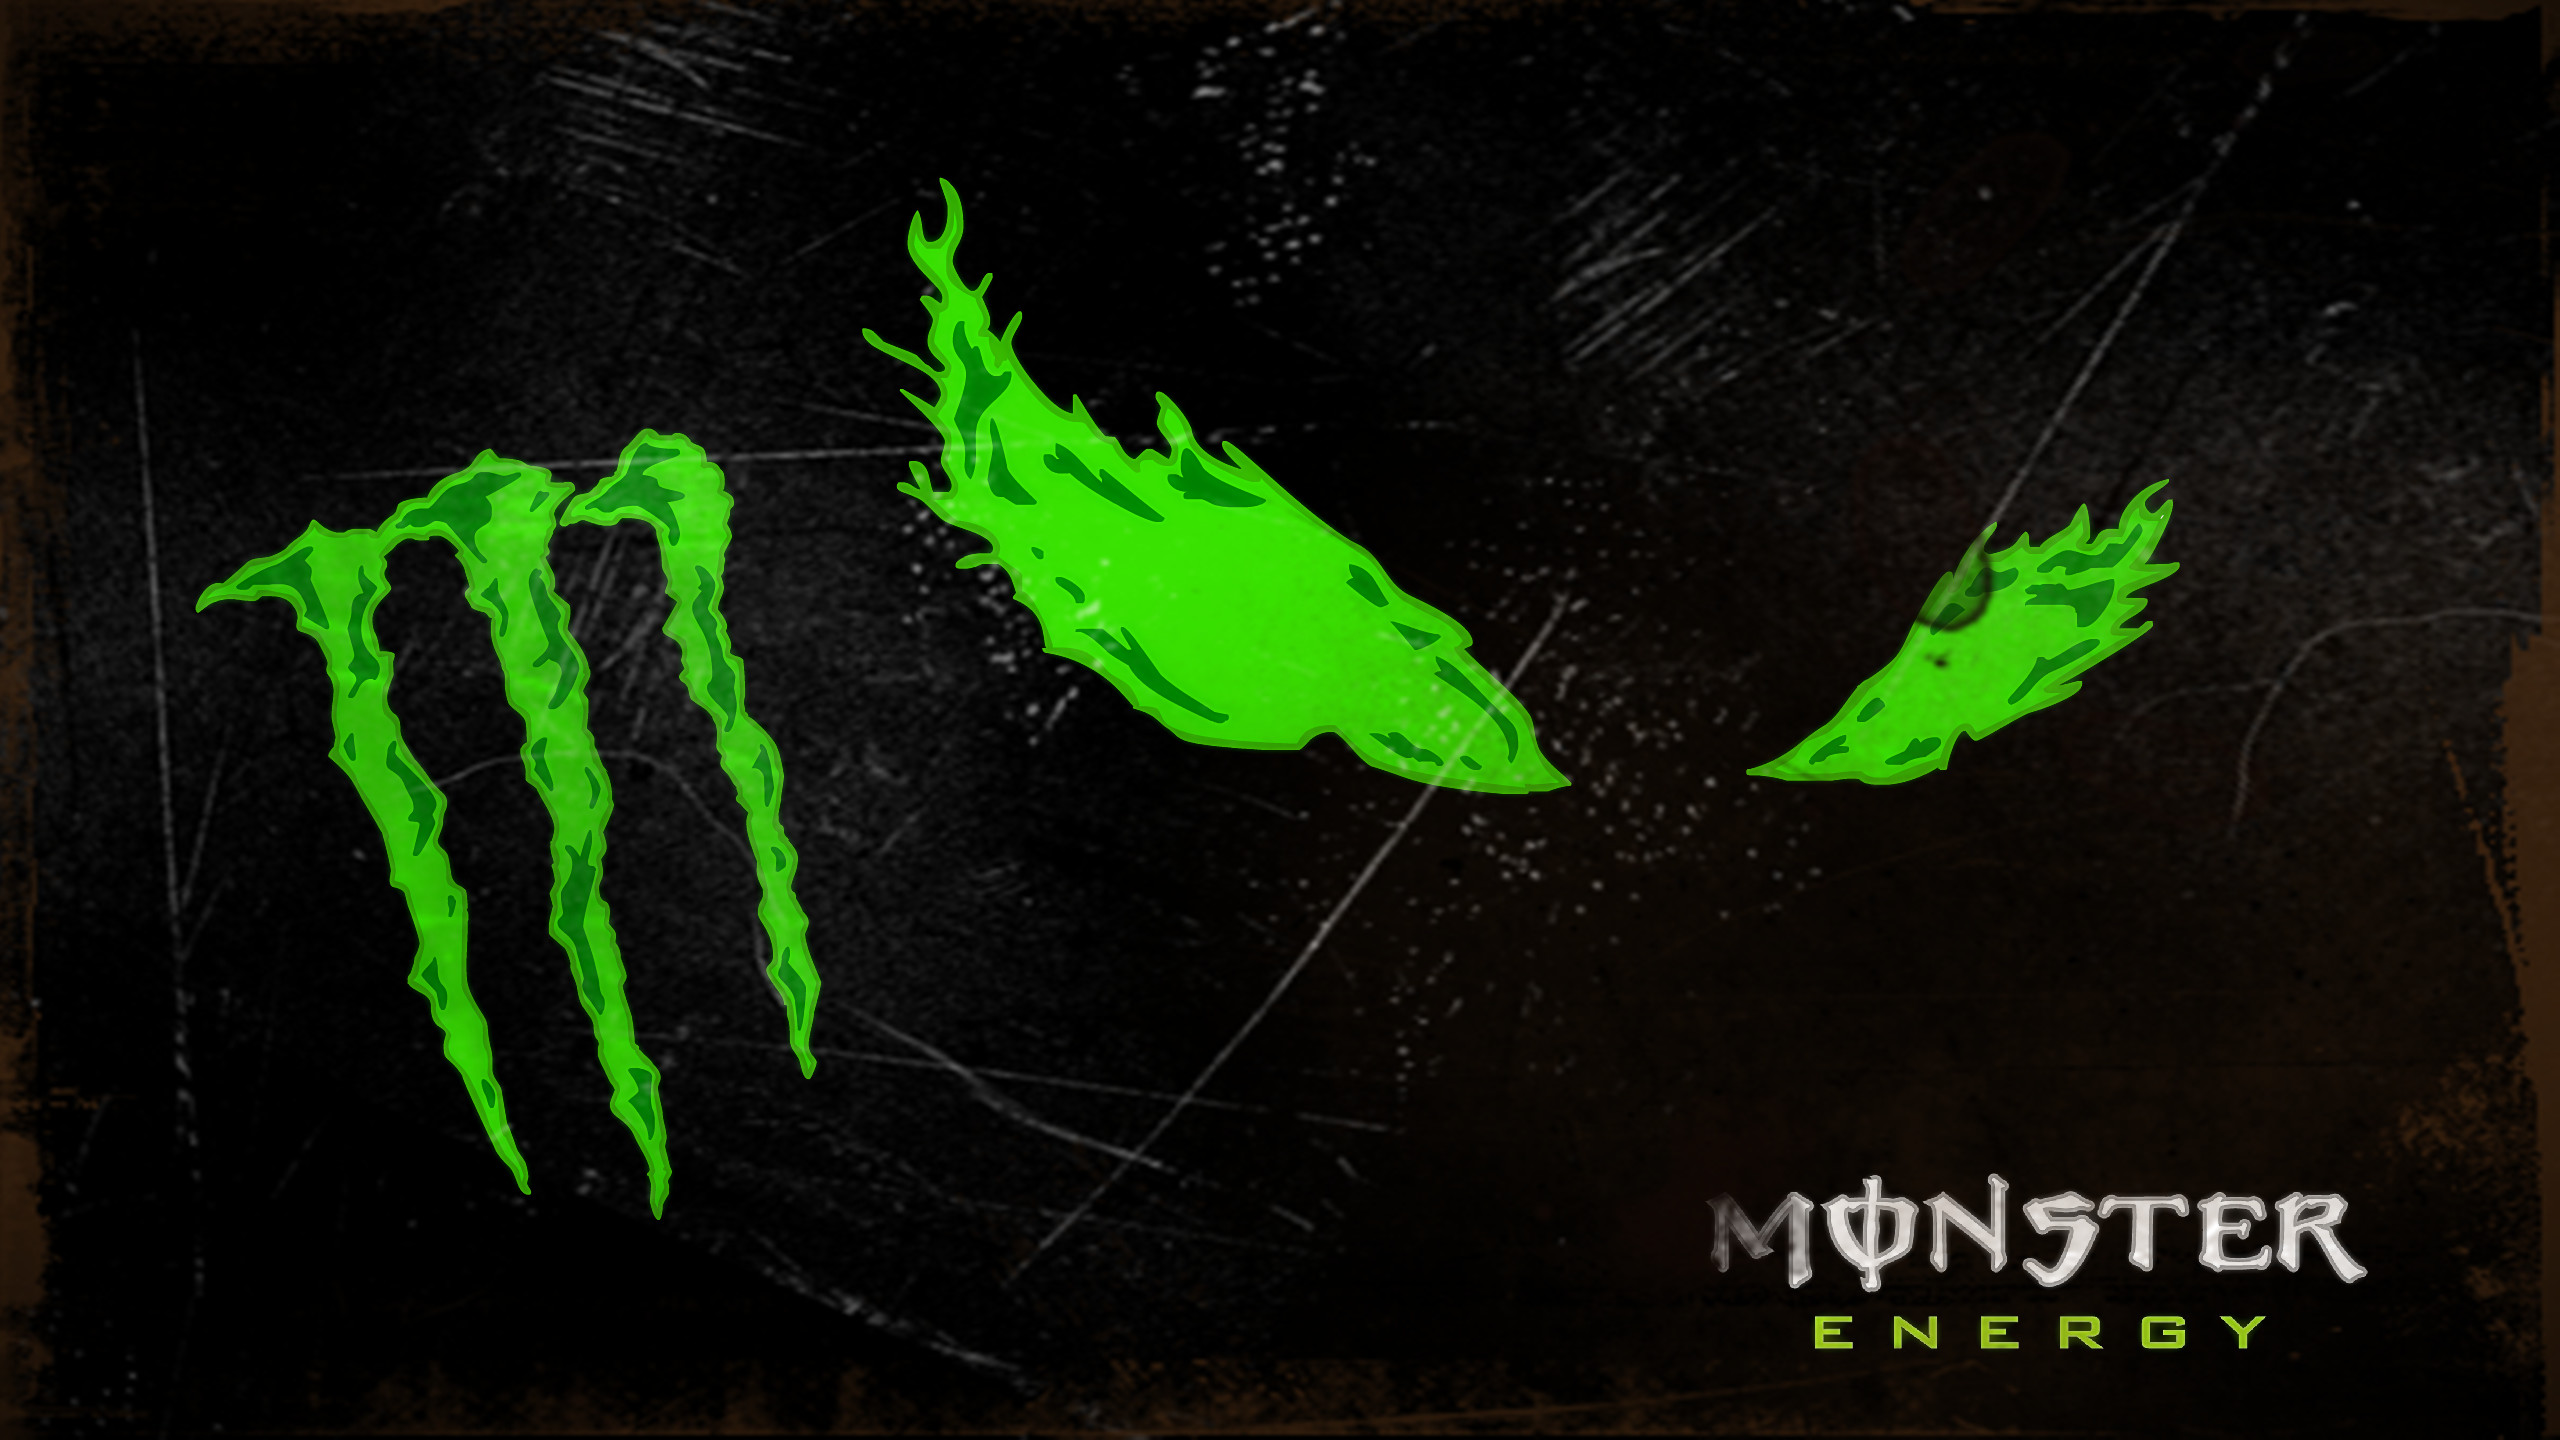 2560x1440 Amazing Monster Energy Eyes High Quality In HD Wallpaper | WALLSEV.